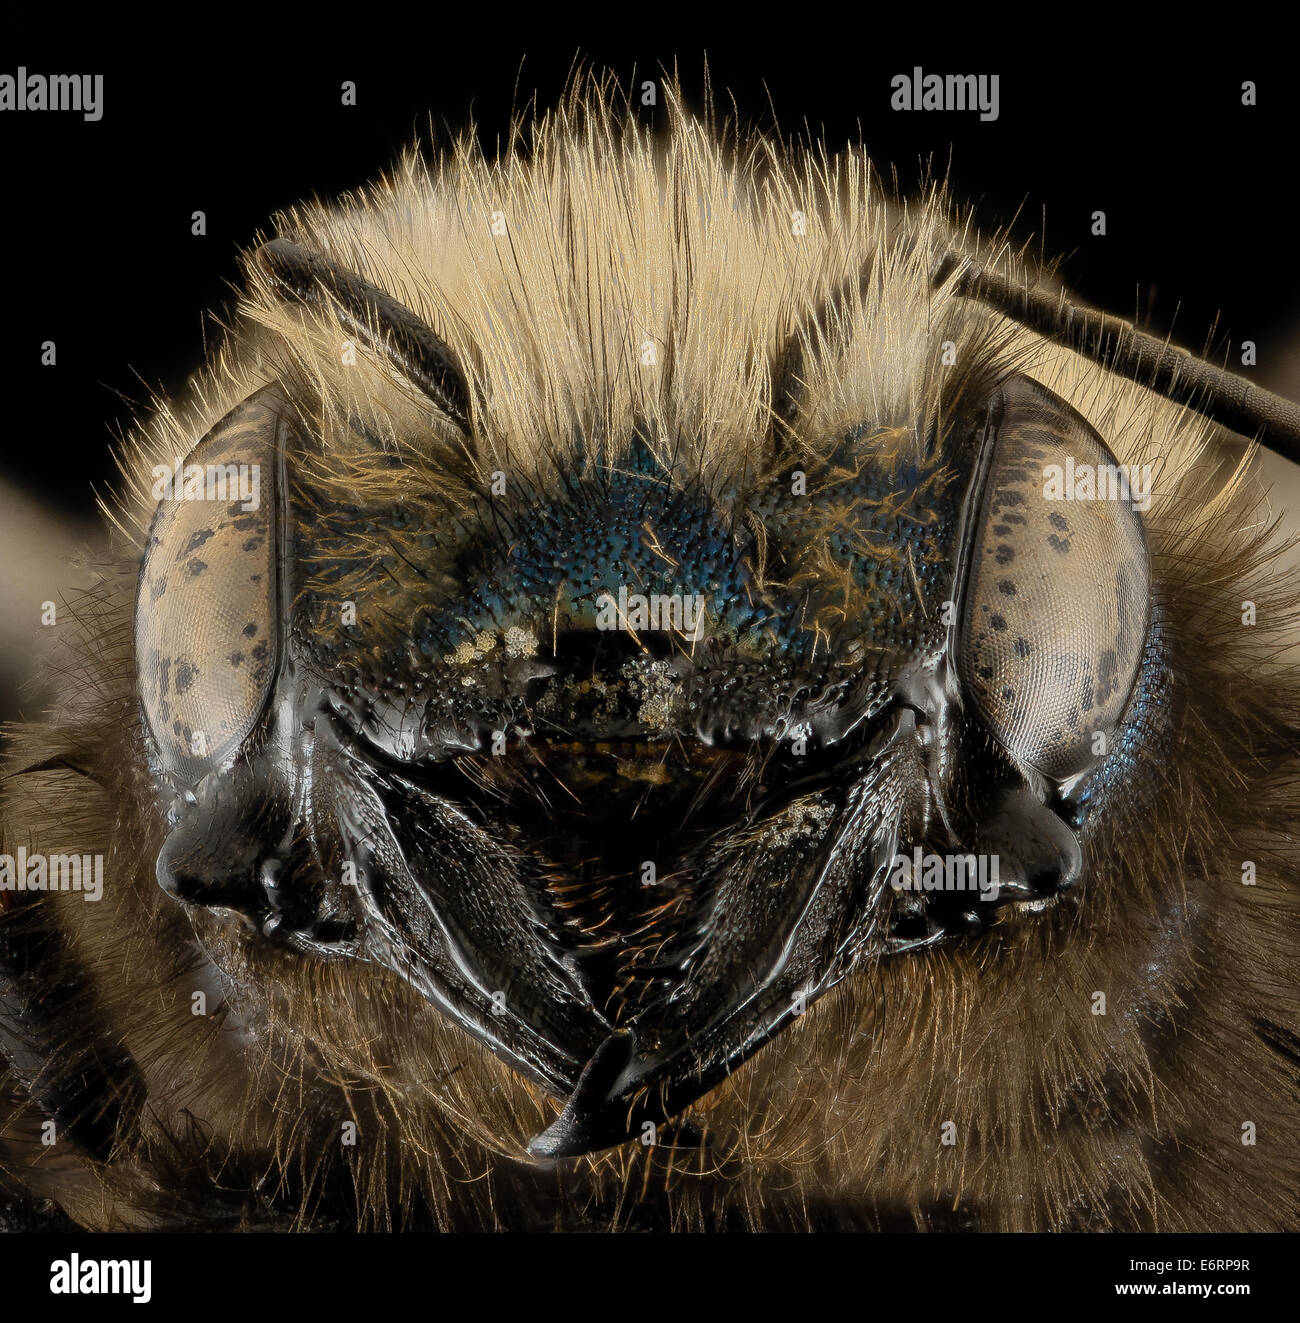 Osmia lignaria, F, Face, Washington, DC 2013-11-13-094456 ZS PMax 12330260505 o Here you can see the sculptured wonder of an Osm Stock Photo